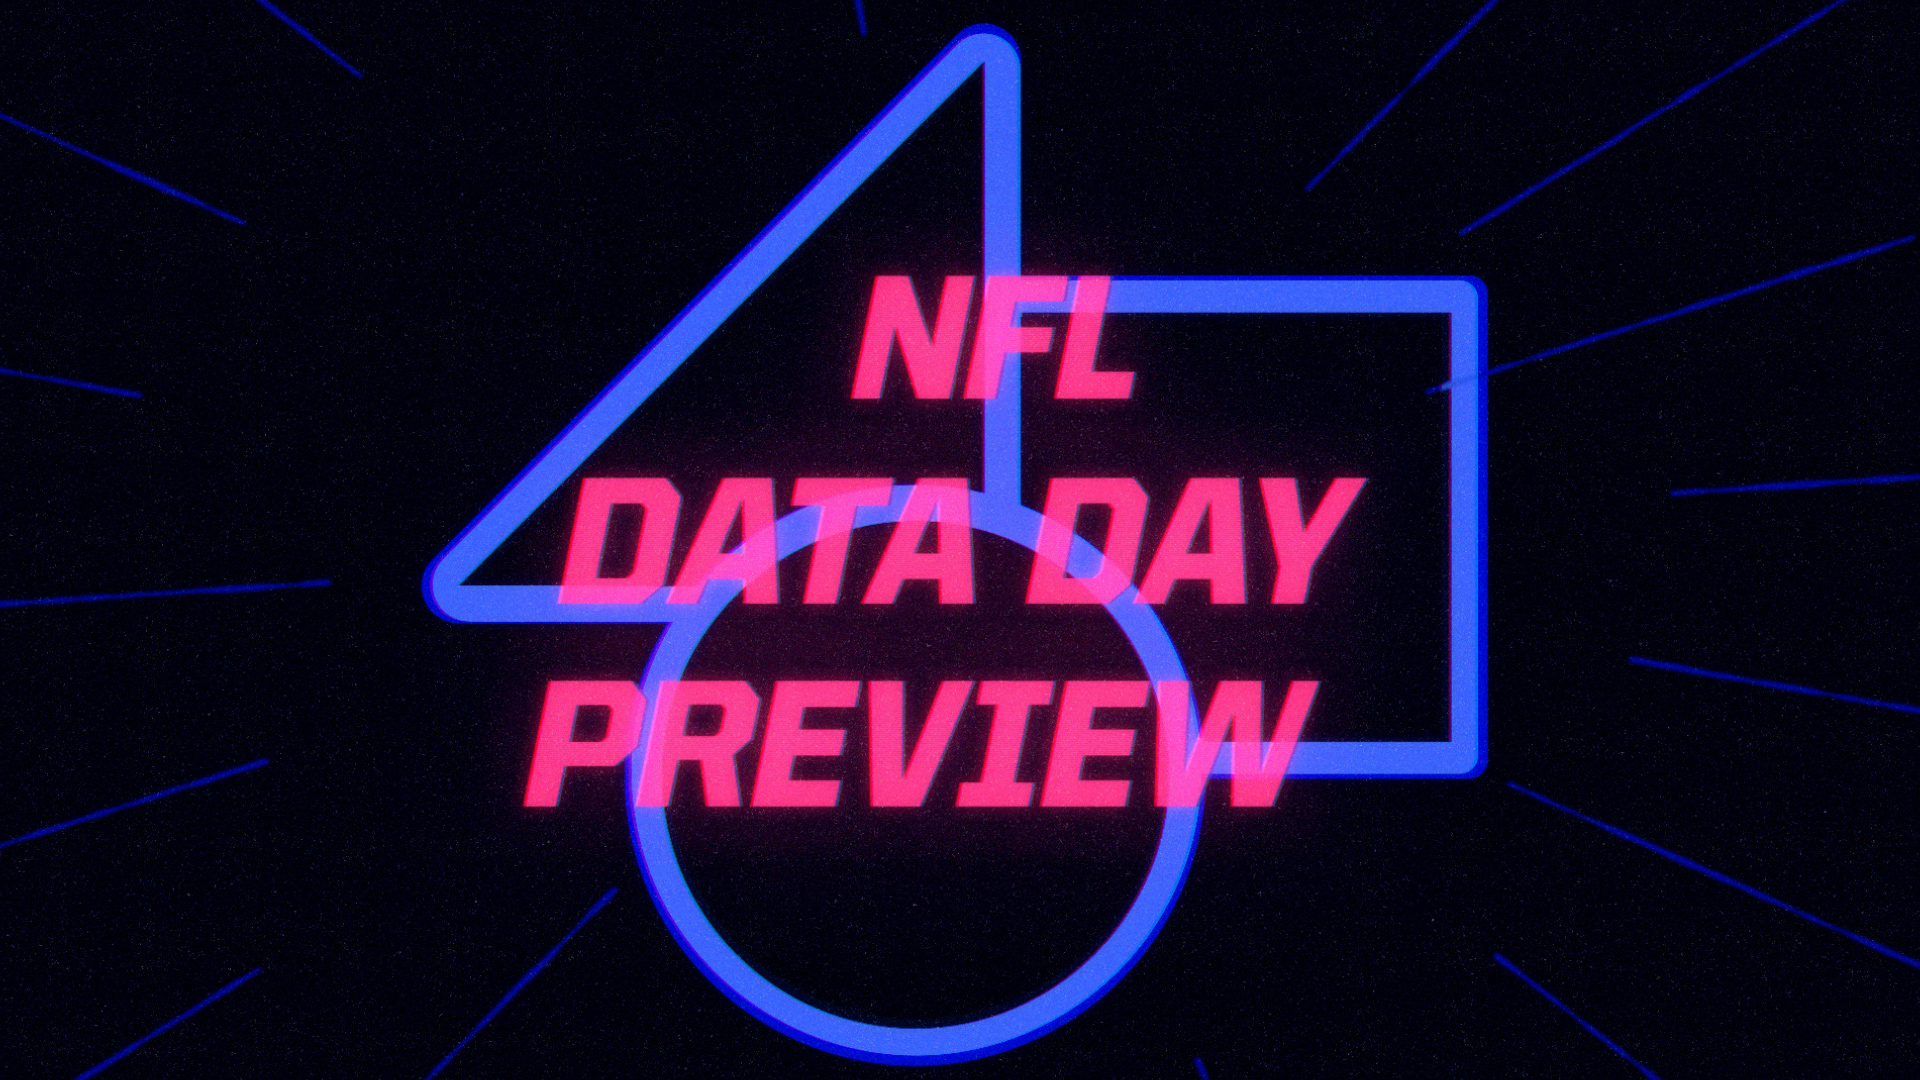 NFL Week 9 Preview – The Data Day | Can the Bucs Bounce Back?